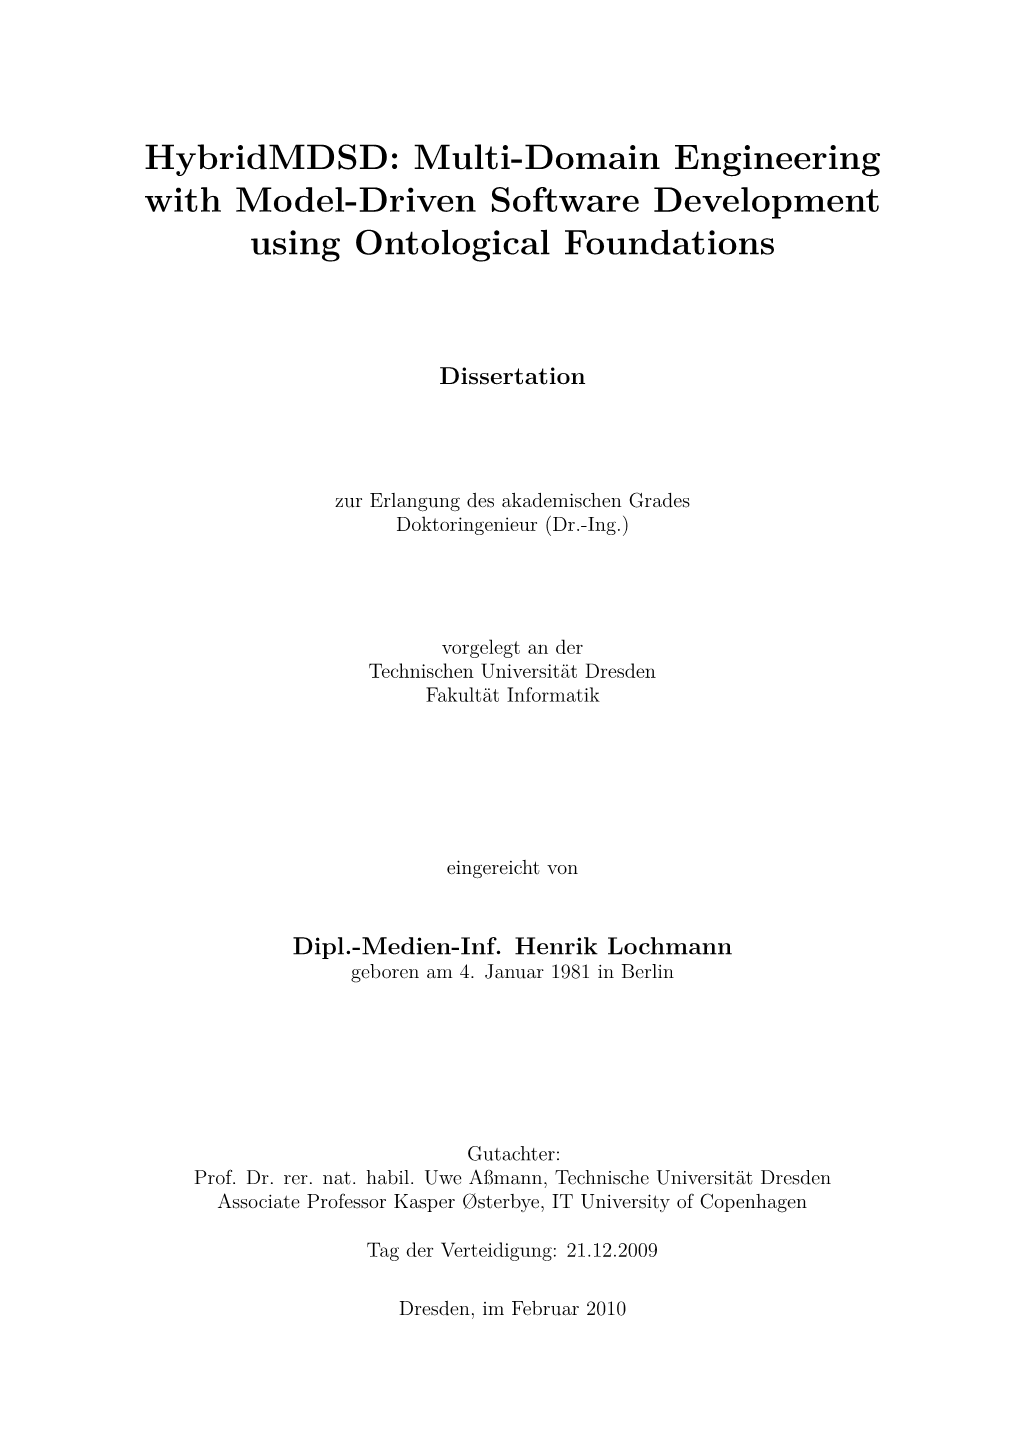 Multi-Domain Engineering with Model-Driven Software Development Using Ontological Foundations